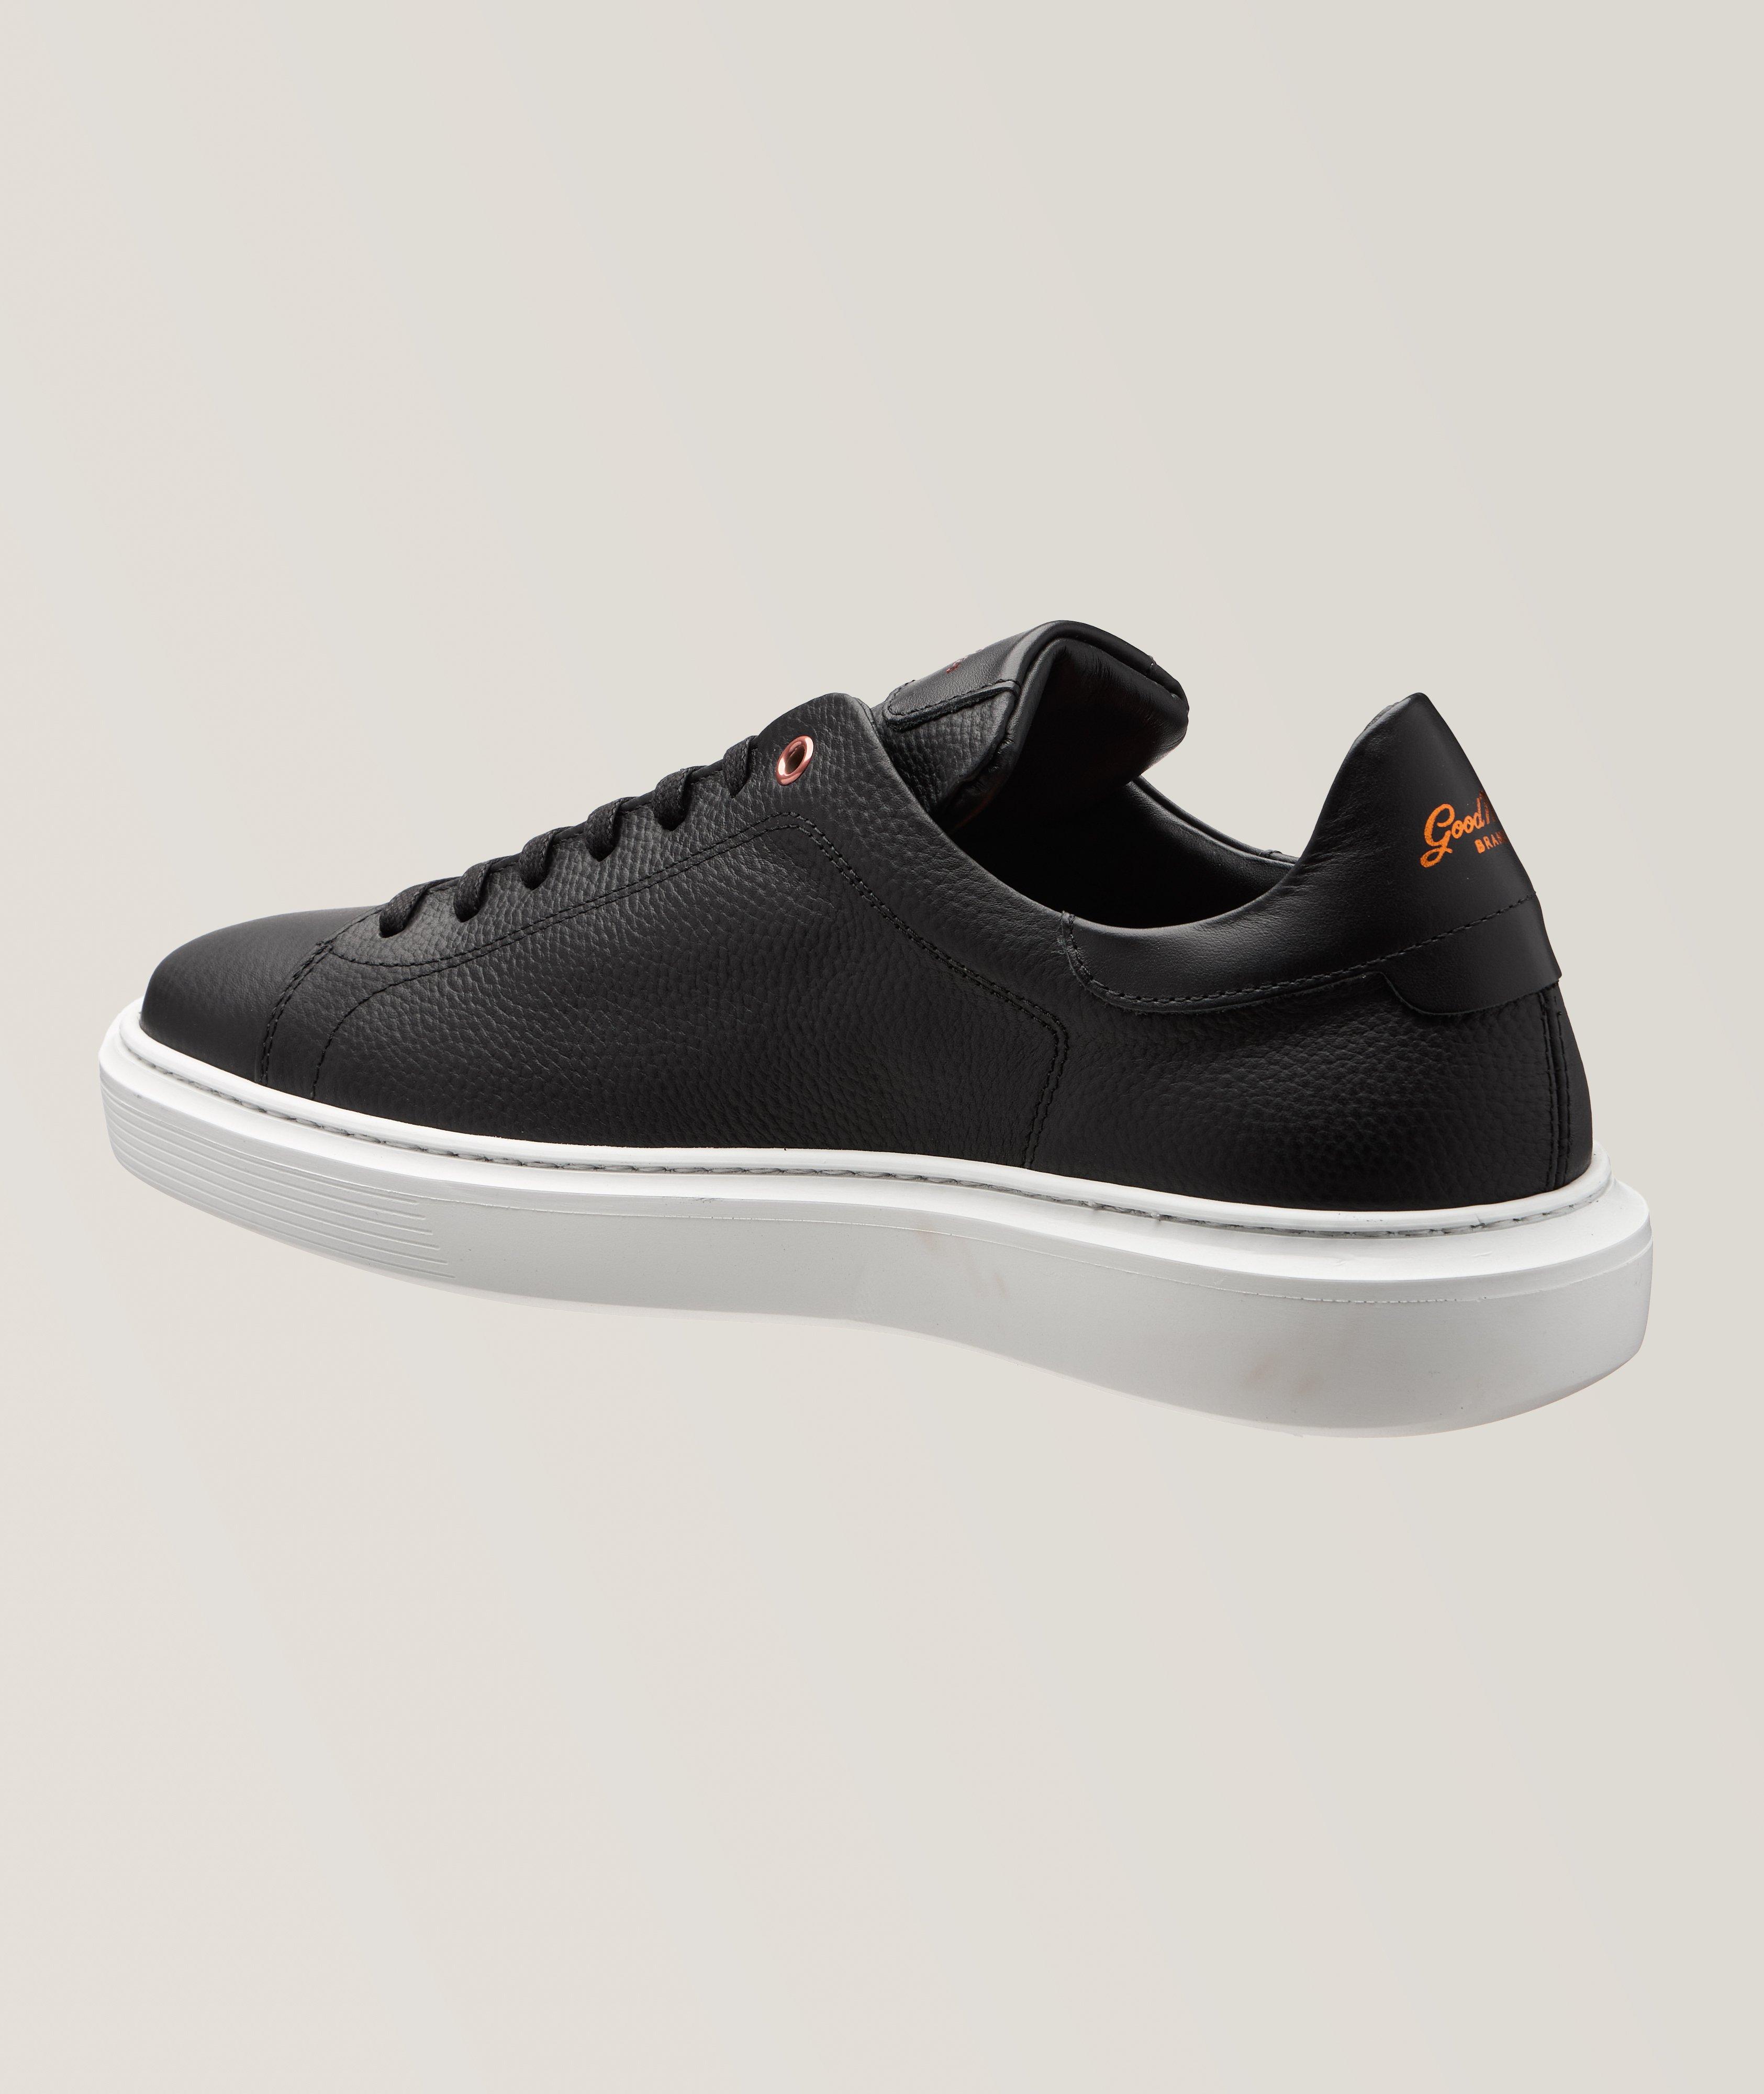 Legend London Pebbled Leather Sneakers